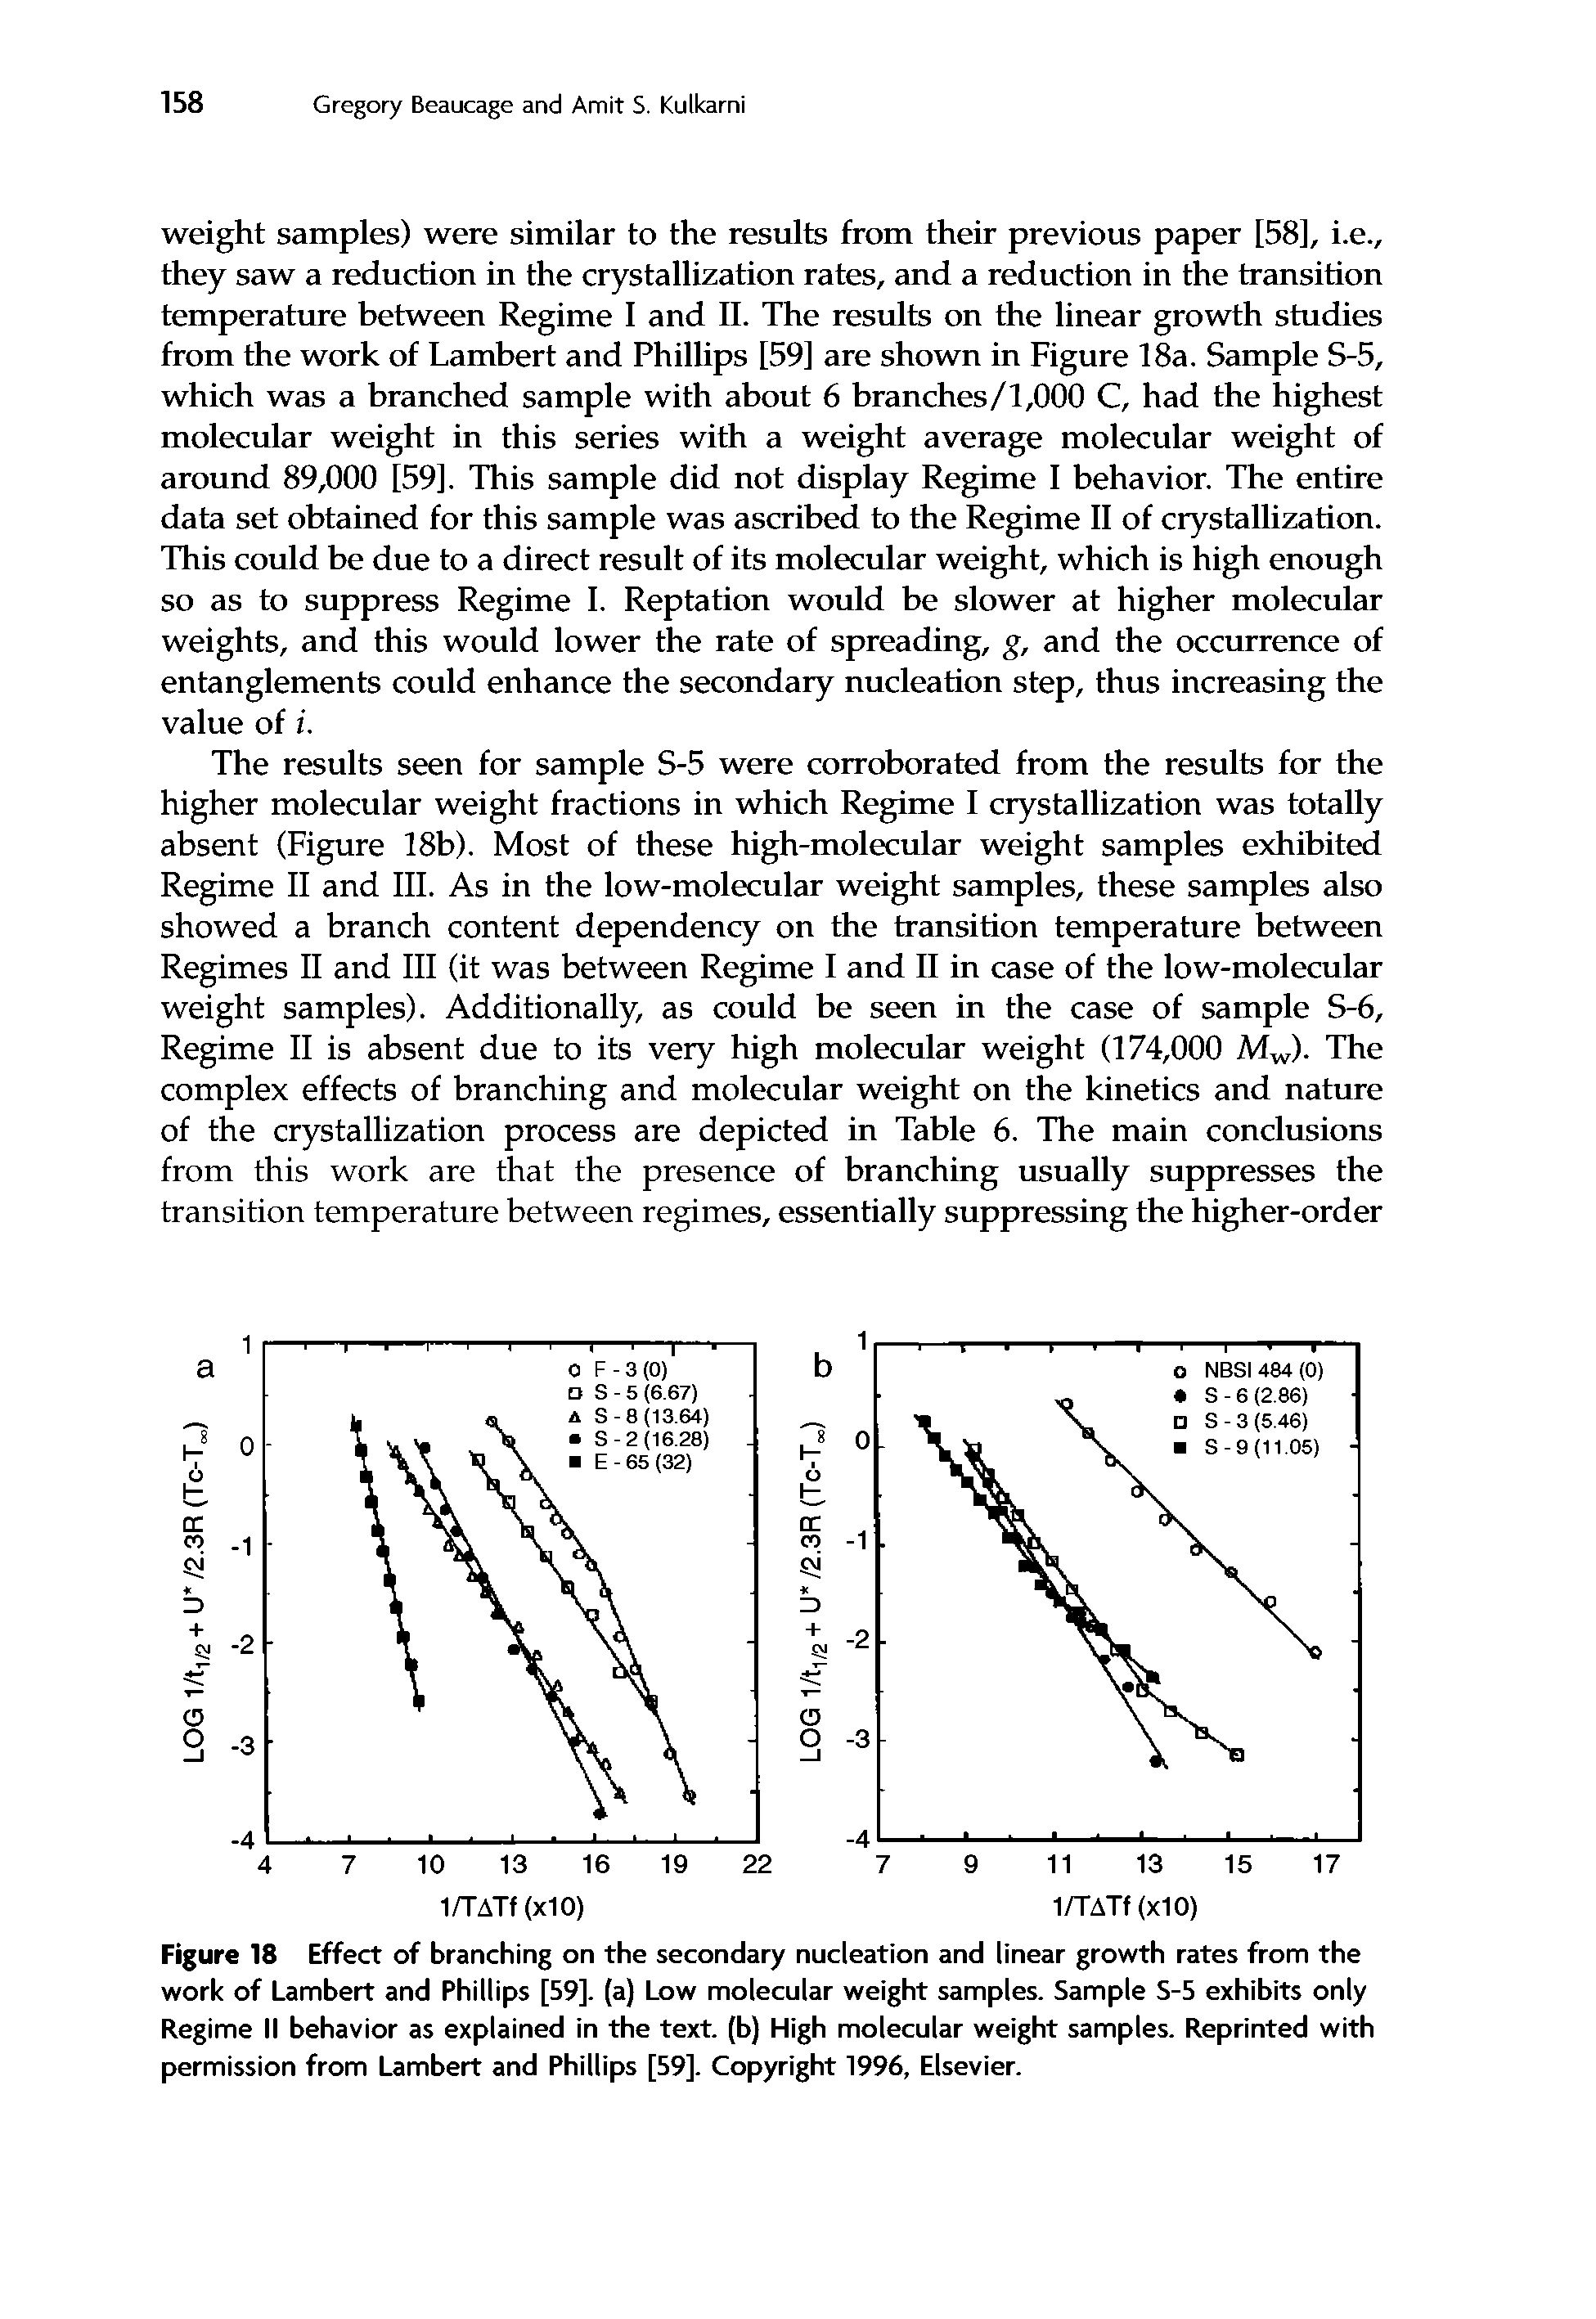 Figure 18 Effect of branching on the secondary nucleation and linear growth rates from the work of Lambert and Phillips [59]. (a) Low molecular weight samples. Sample S-5 exhibits only Regime II behavior as explained in the text, (b) High molecular weight samples. Reprinted with permission from Lambert and Phillips [59]. Copyright 1996, Elsevier.